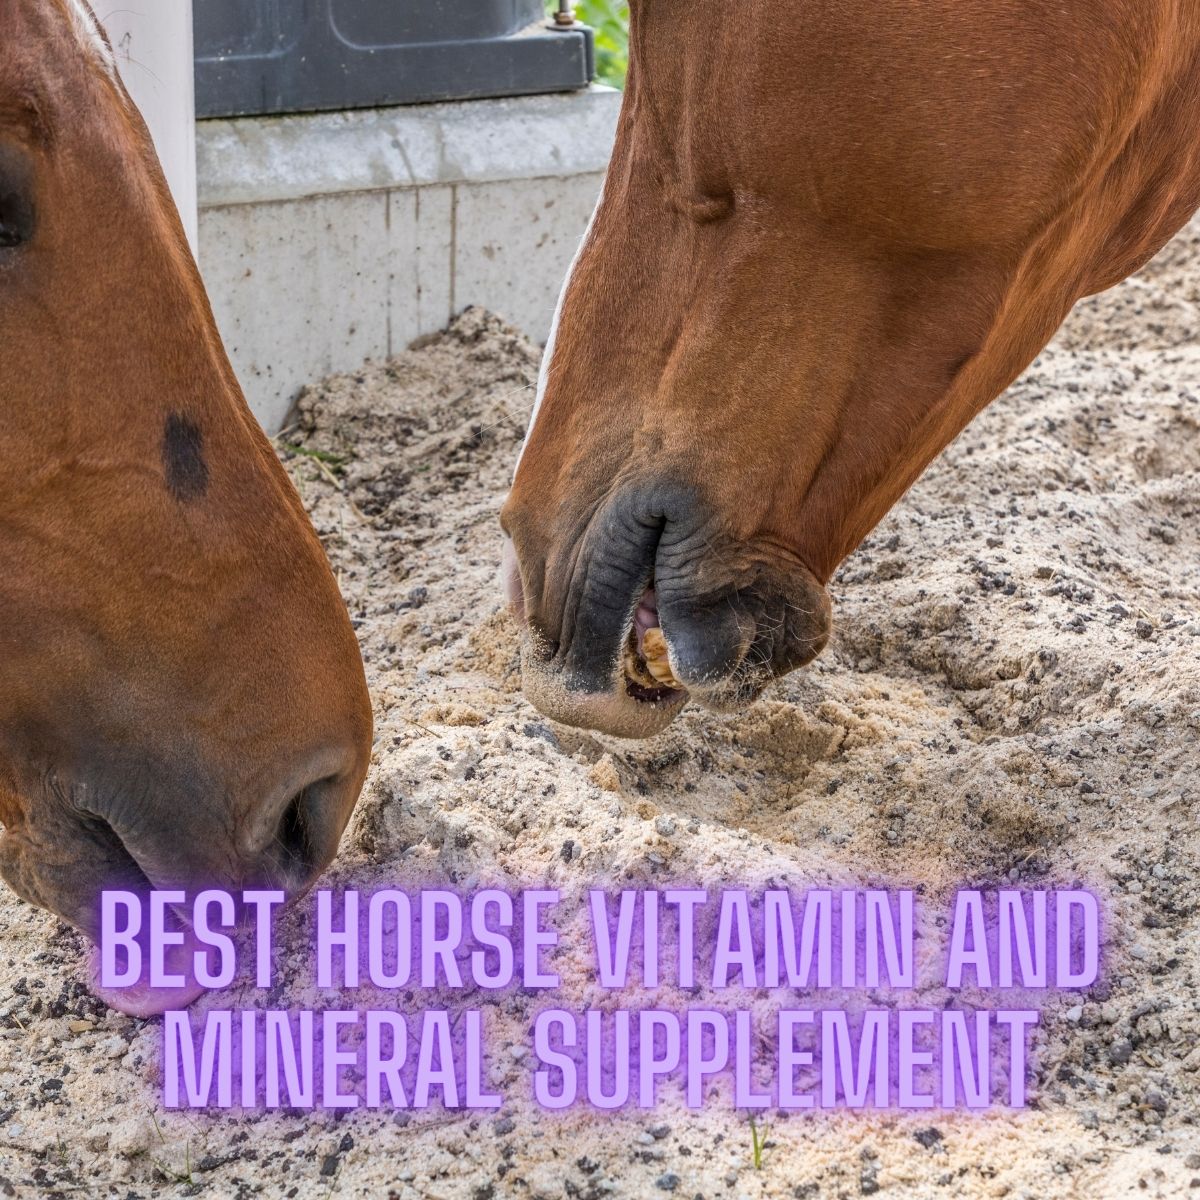 Best Horse Vitamin and Mineral Supplement: Top Choices for Optimal Equine Health